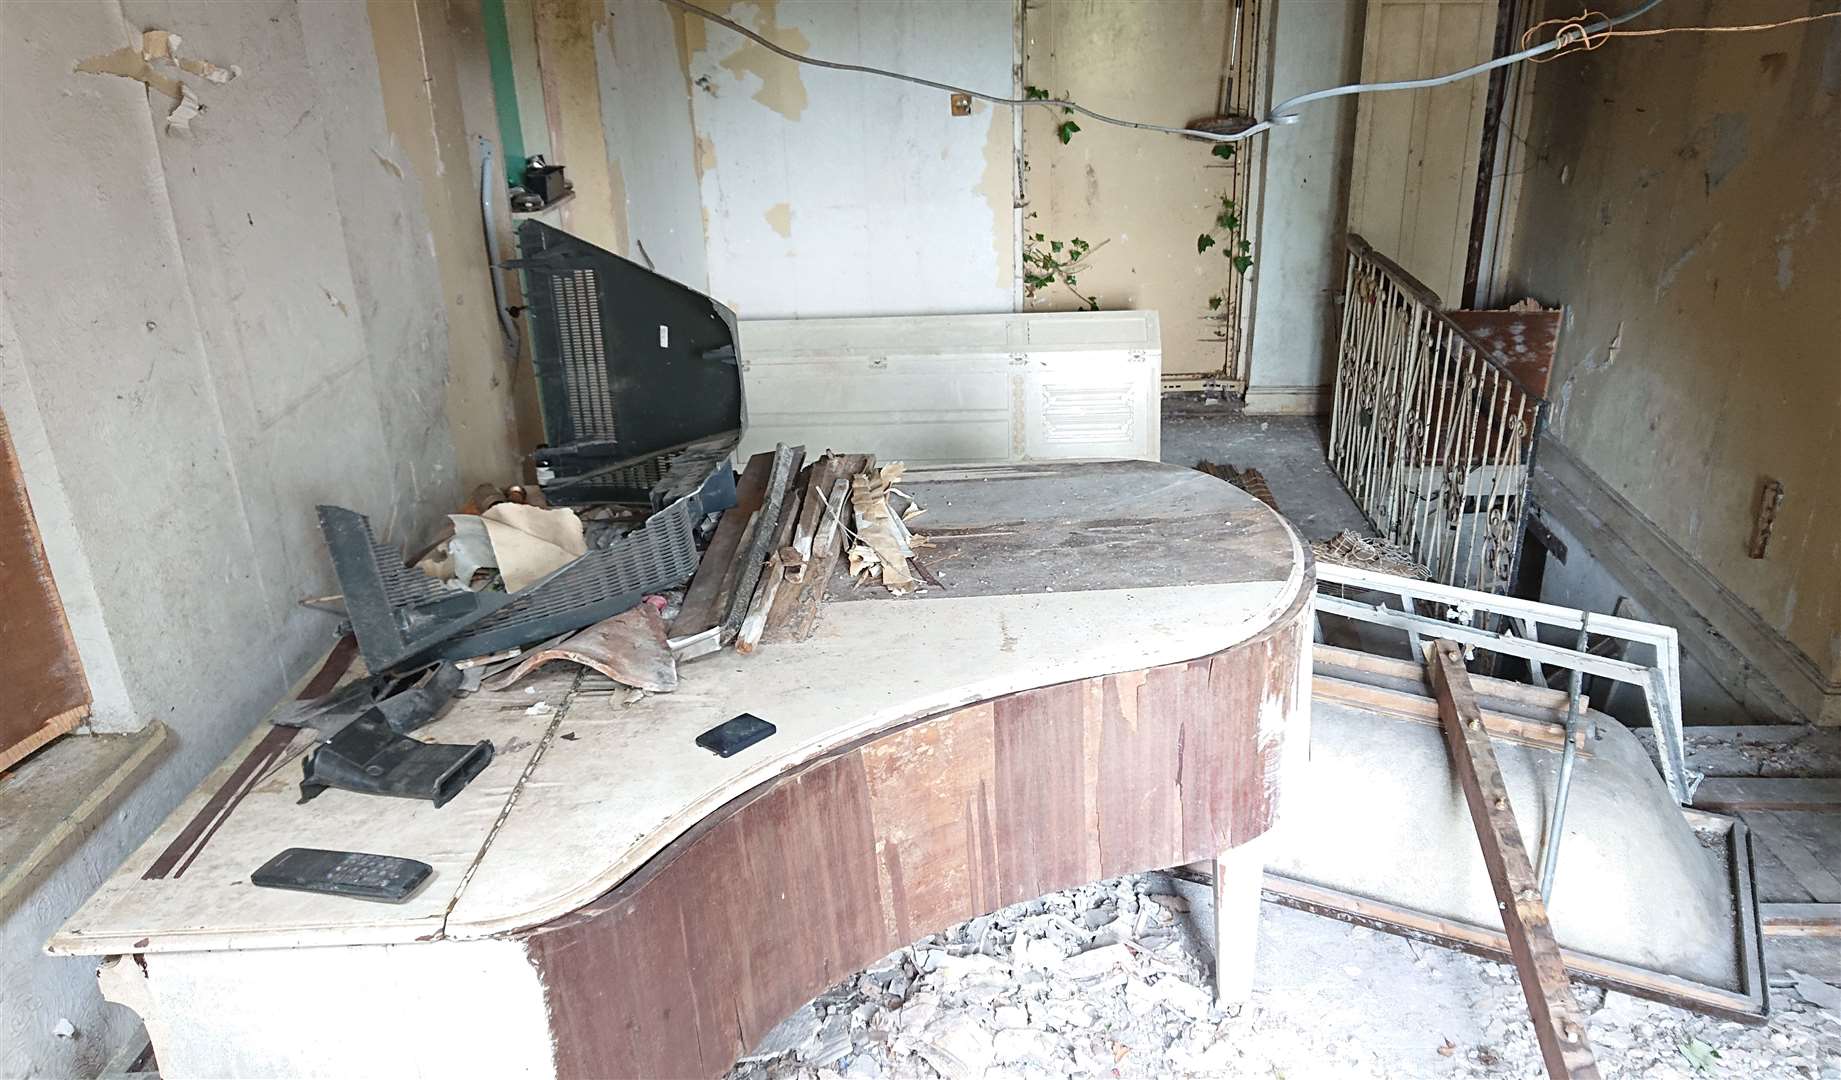 The inside of the former home of Jackie Pollo, taken by Paul Jones